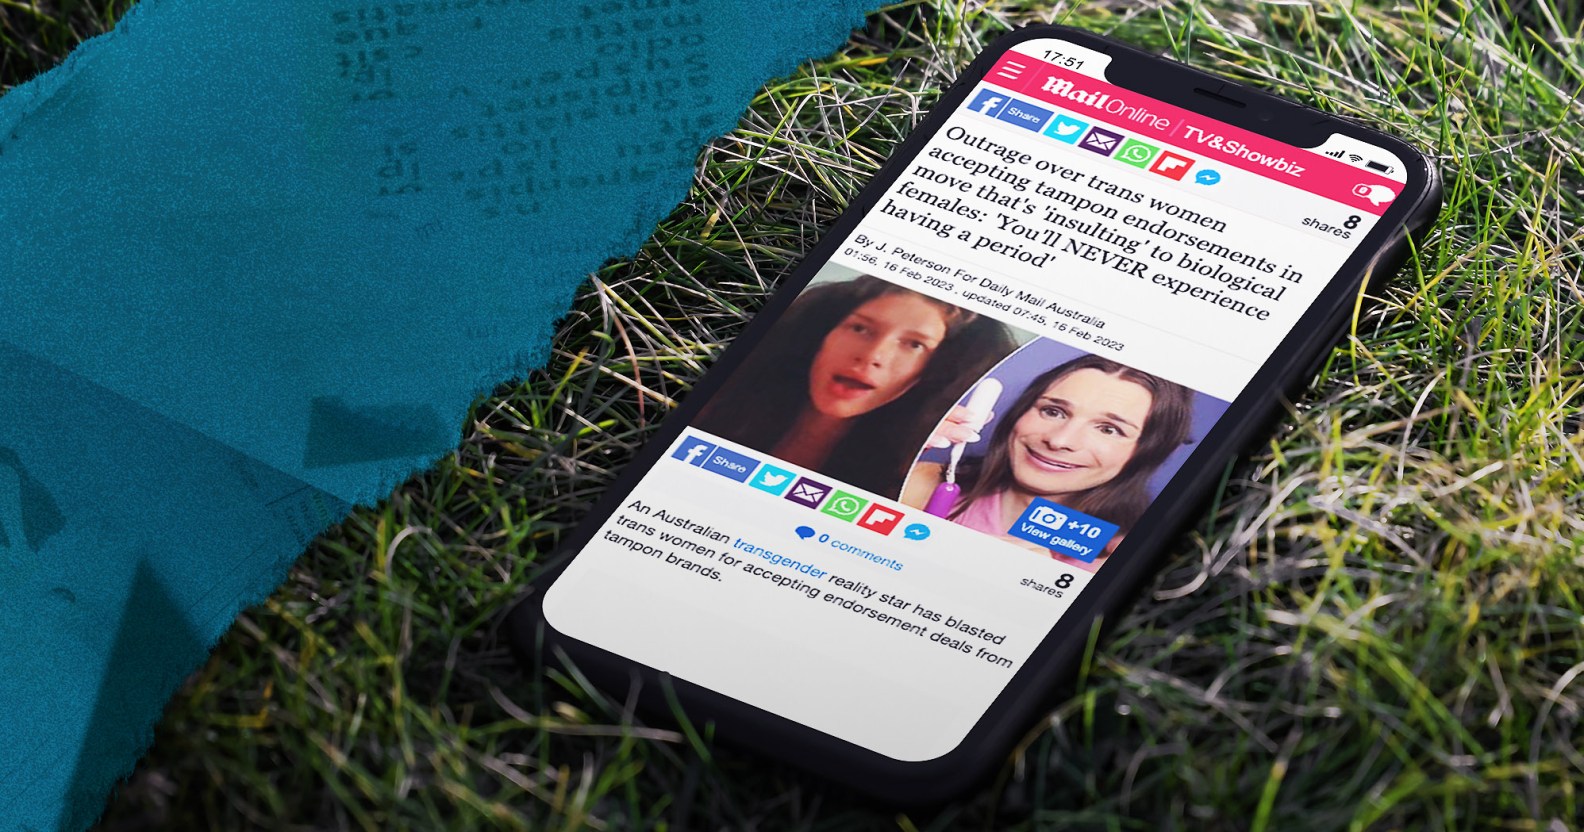 Mock-up image shows phone with an anti-trans headline on